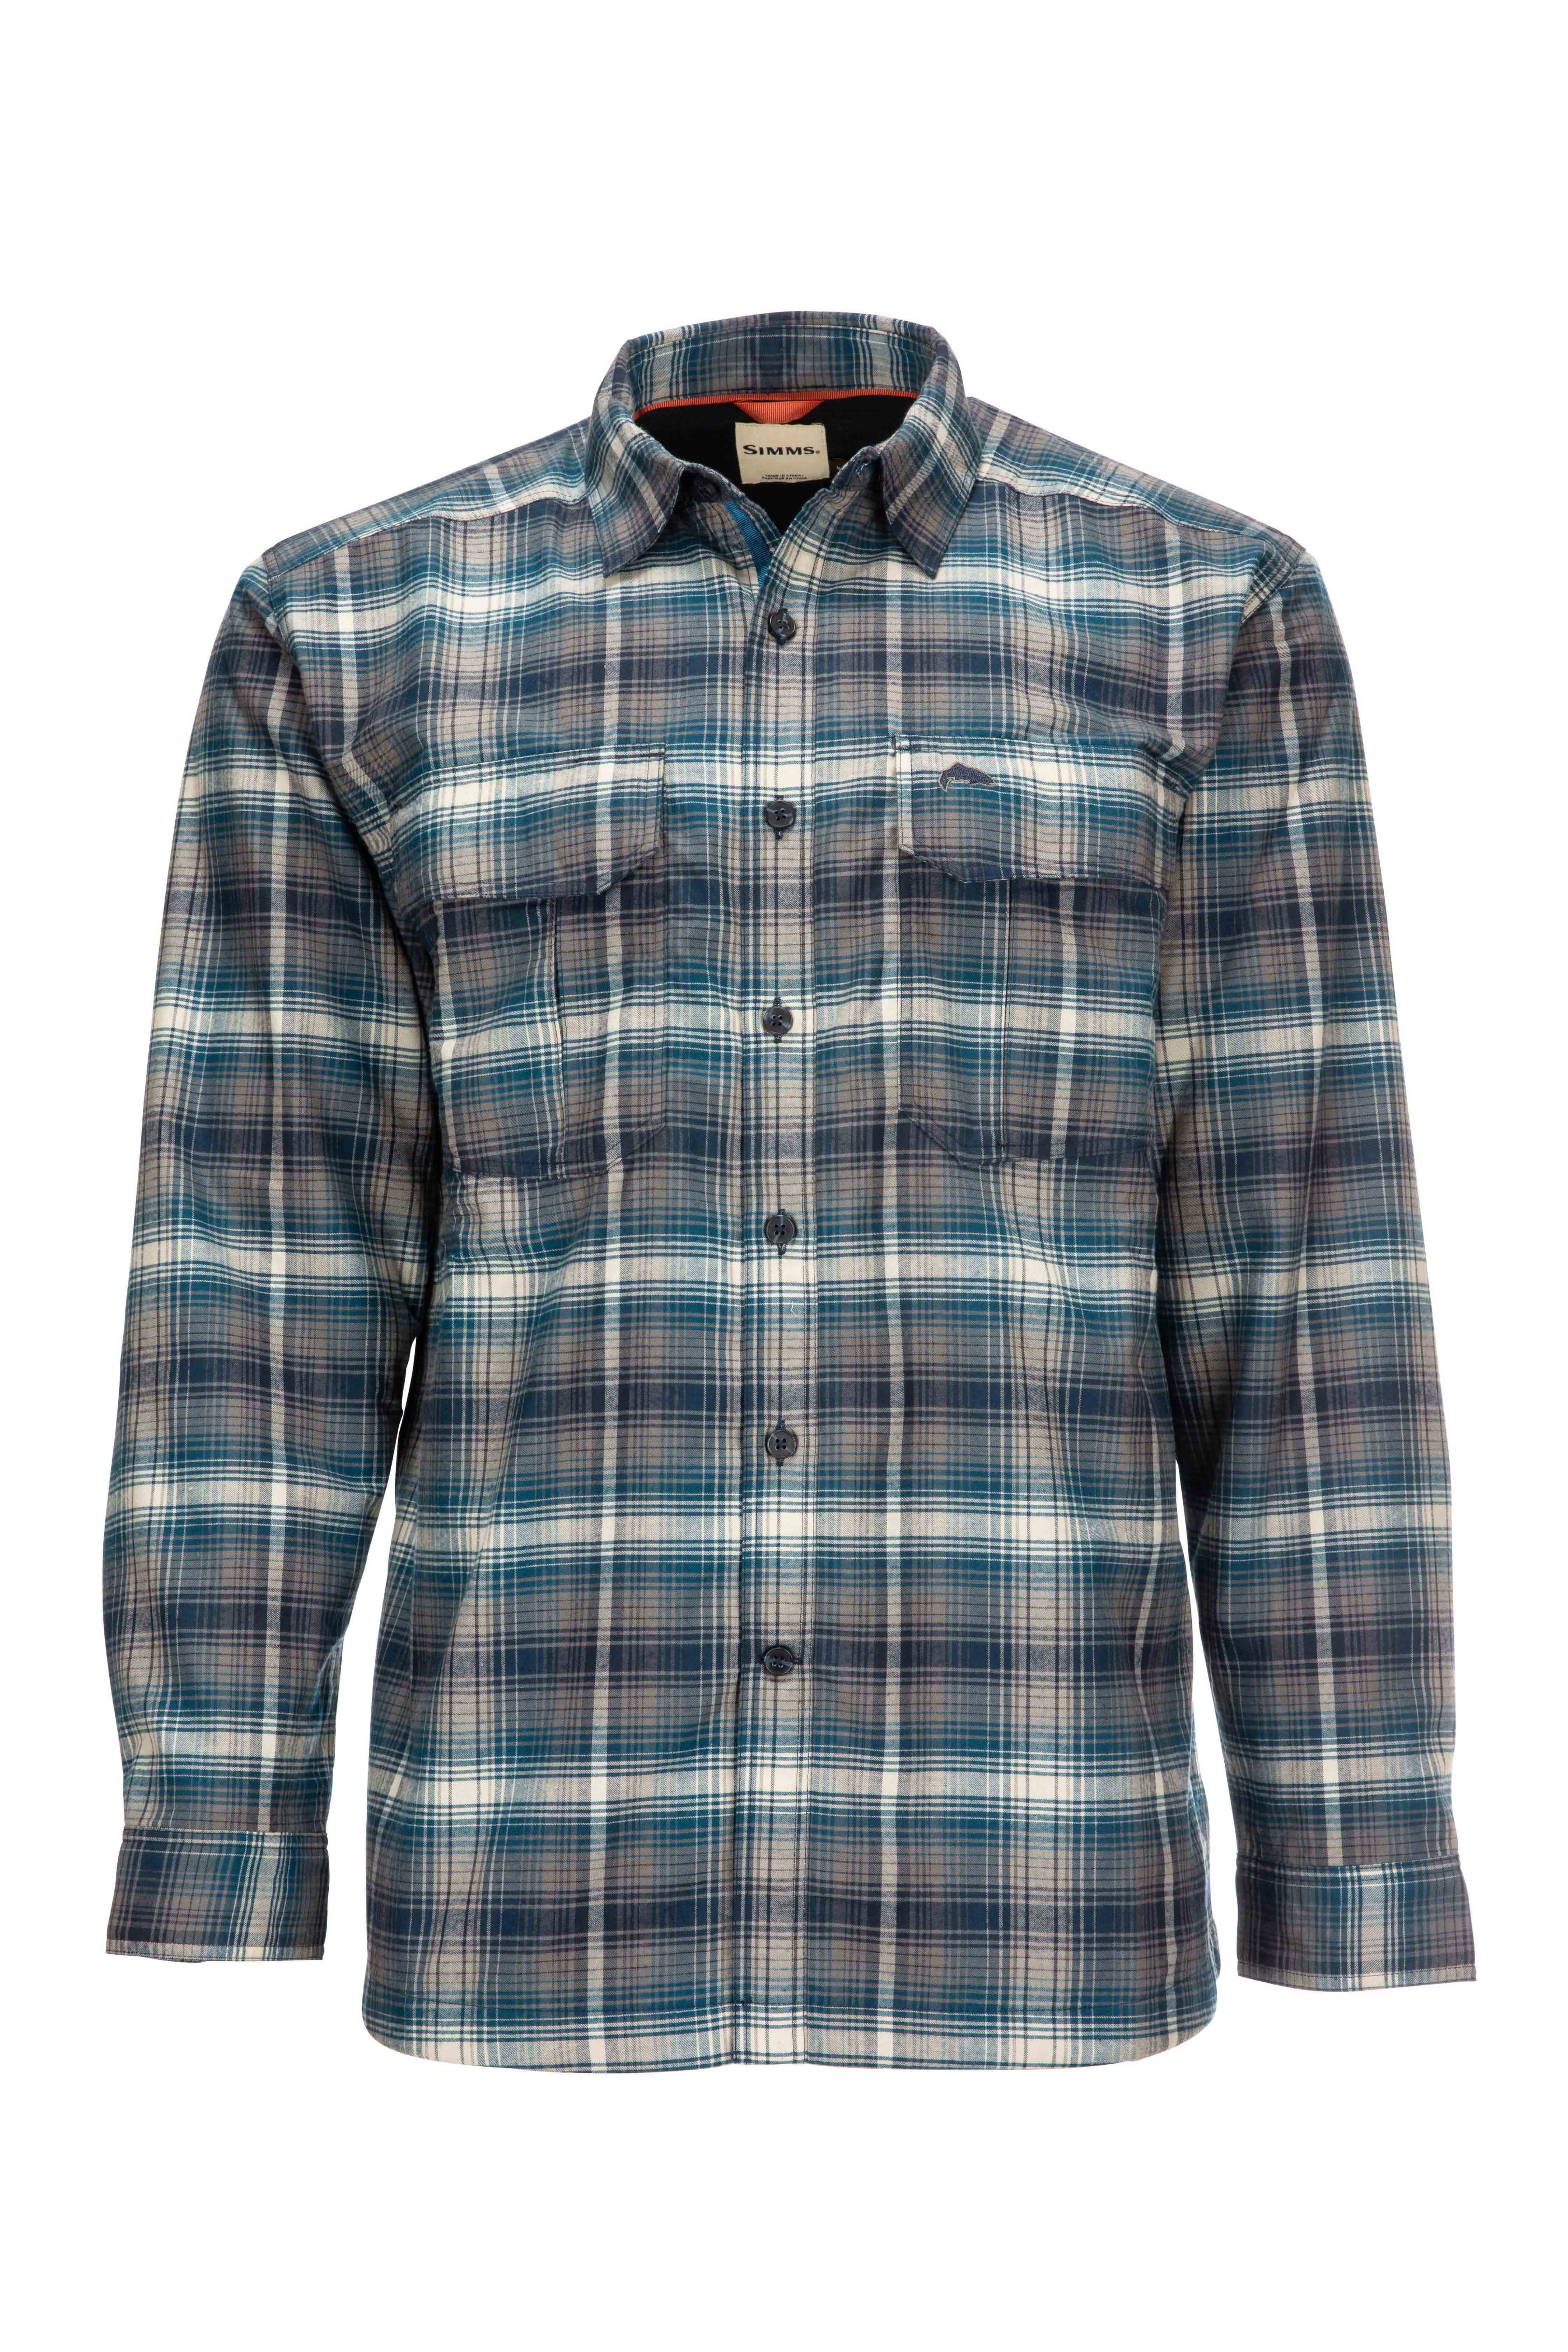 simms 40% OFF! SIMMS Coldweather Shirt | Feather-Craft Fly Fishing